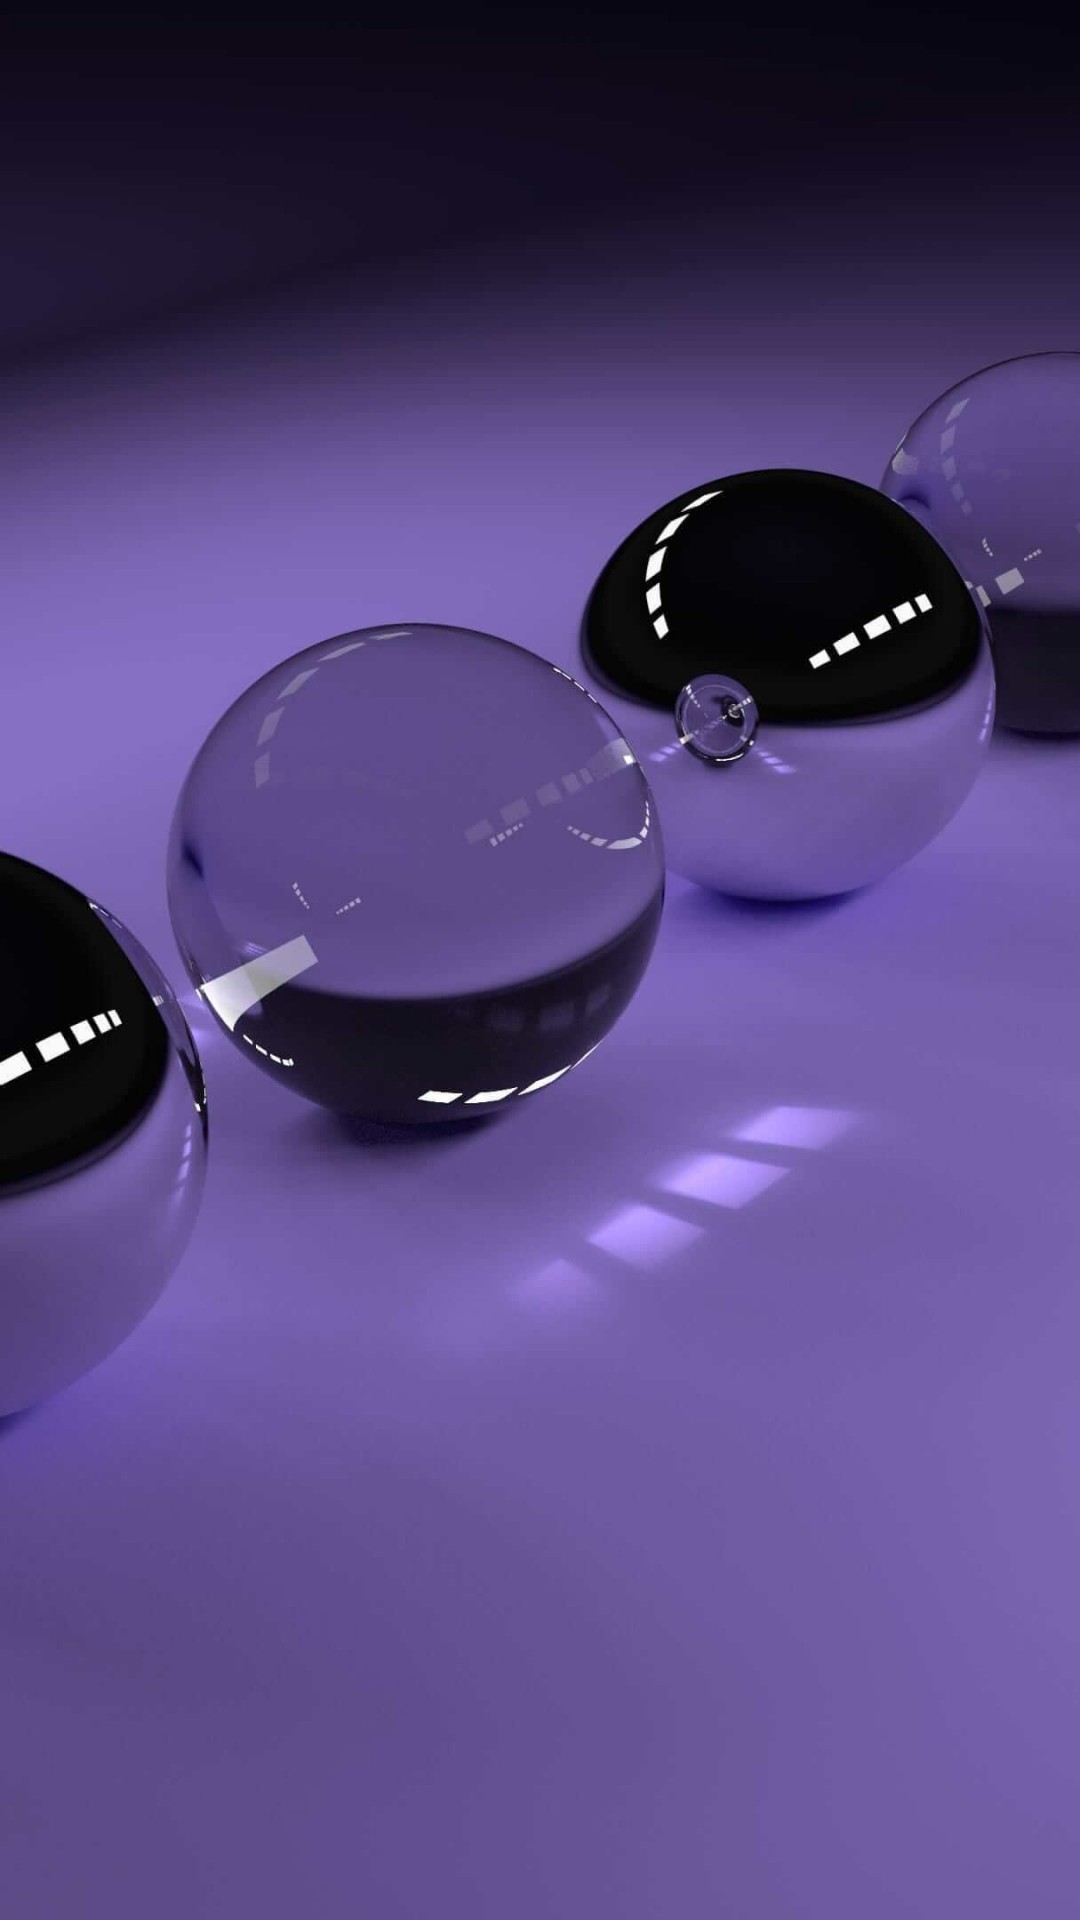 3D Glossy Spheres Wallpaper for HTC One